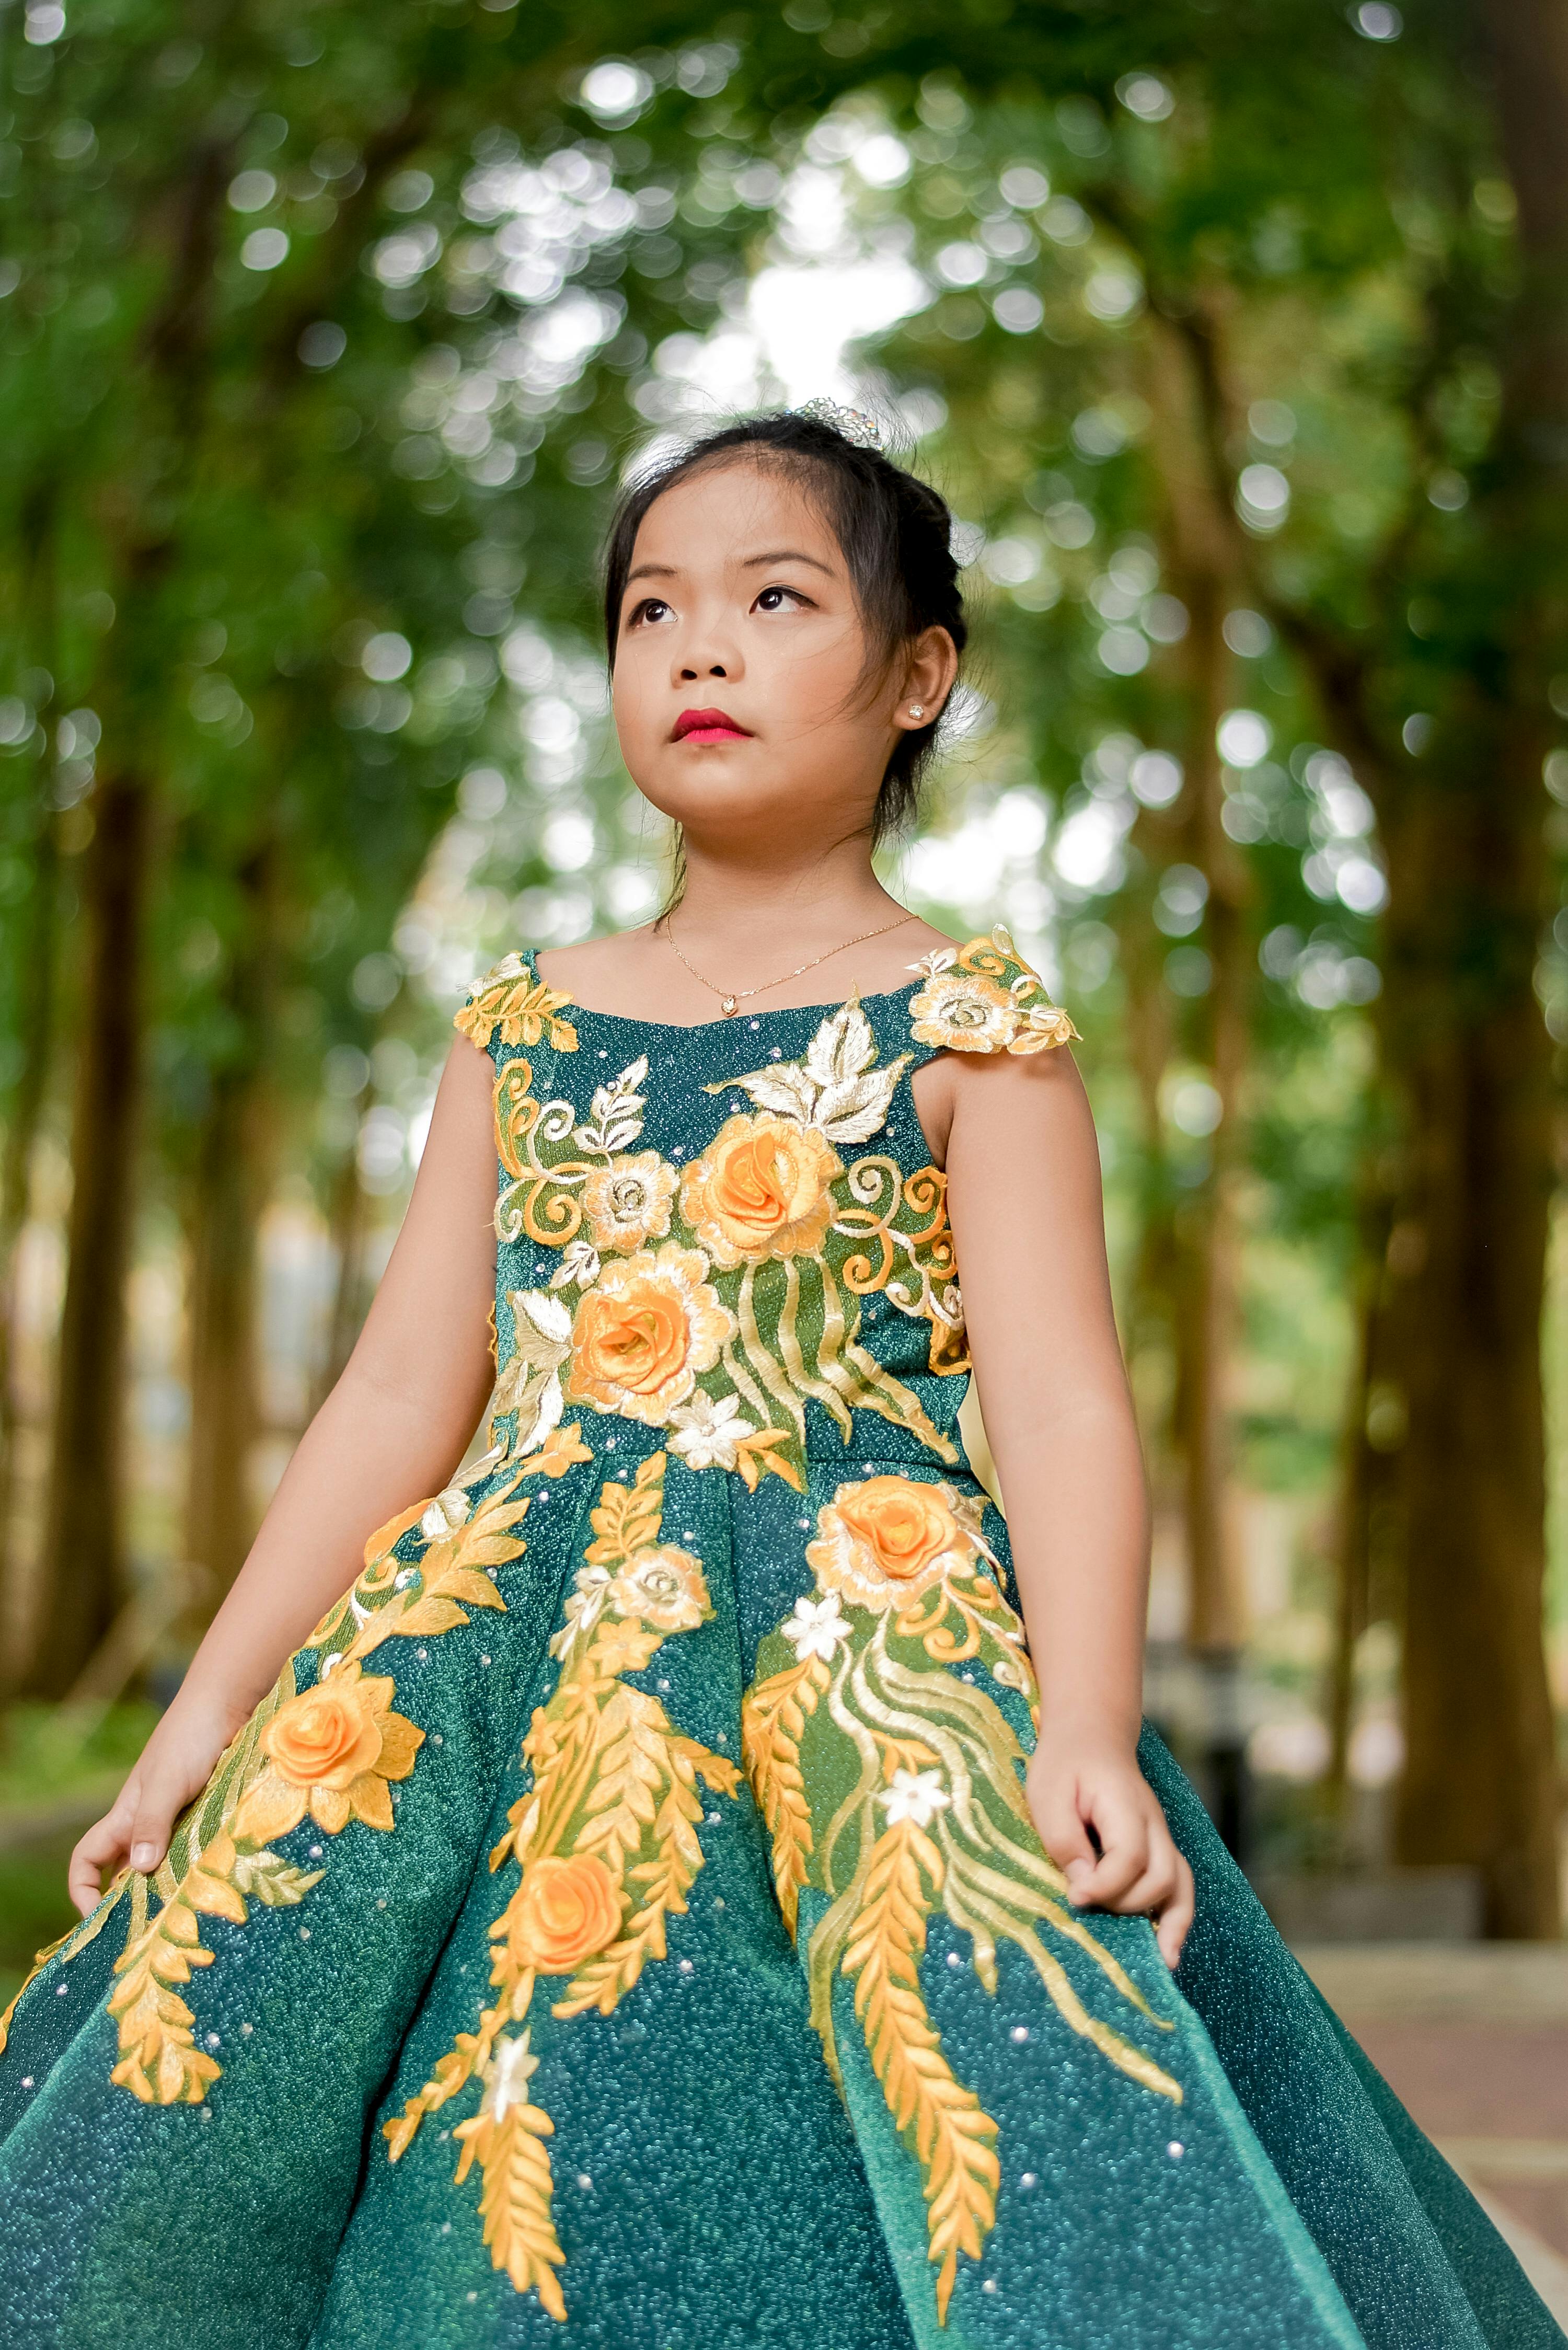 Graceful Woman in Green Dress Stock Image - Image of green, calm: 103264671